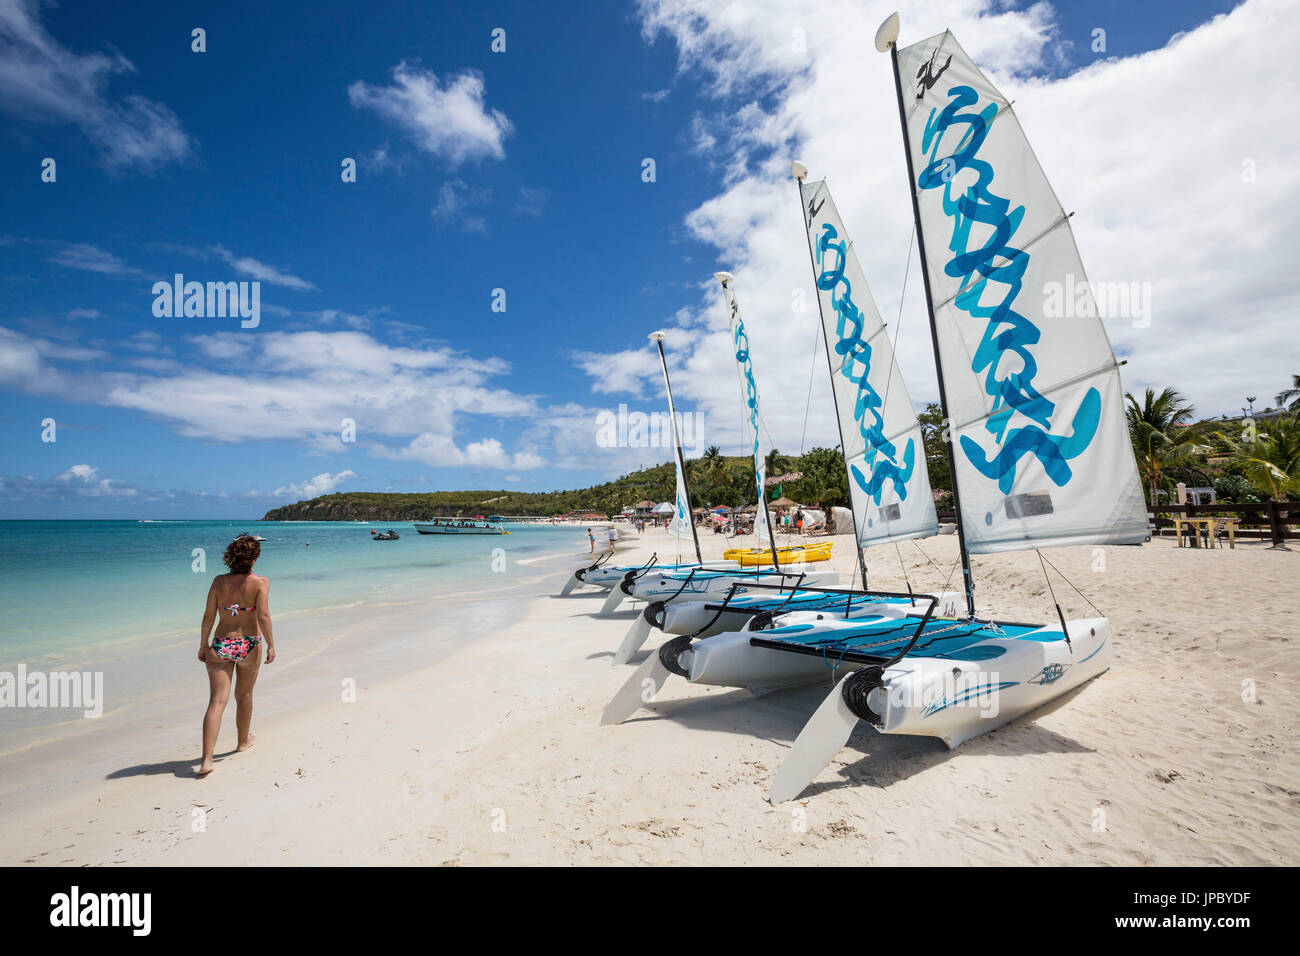 A tourist on the sandy beach equipped with catamarans Dickenson Bay Caribbean Antigua and Barbuda Leeward Island West Indies Stock Photo